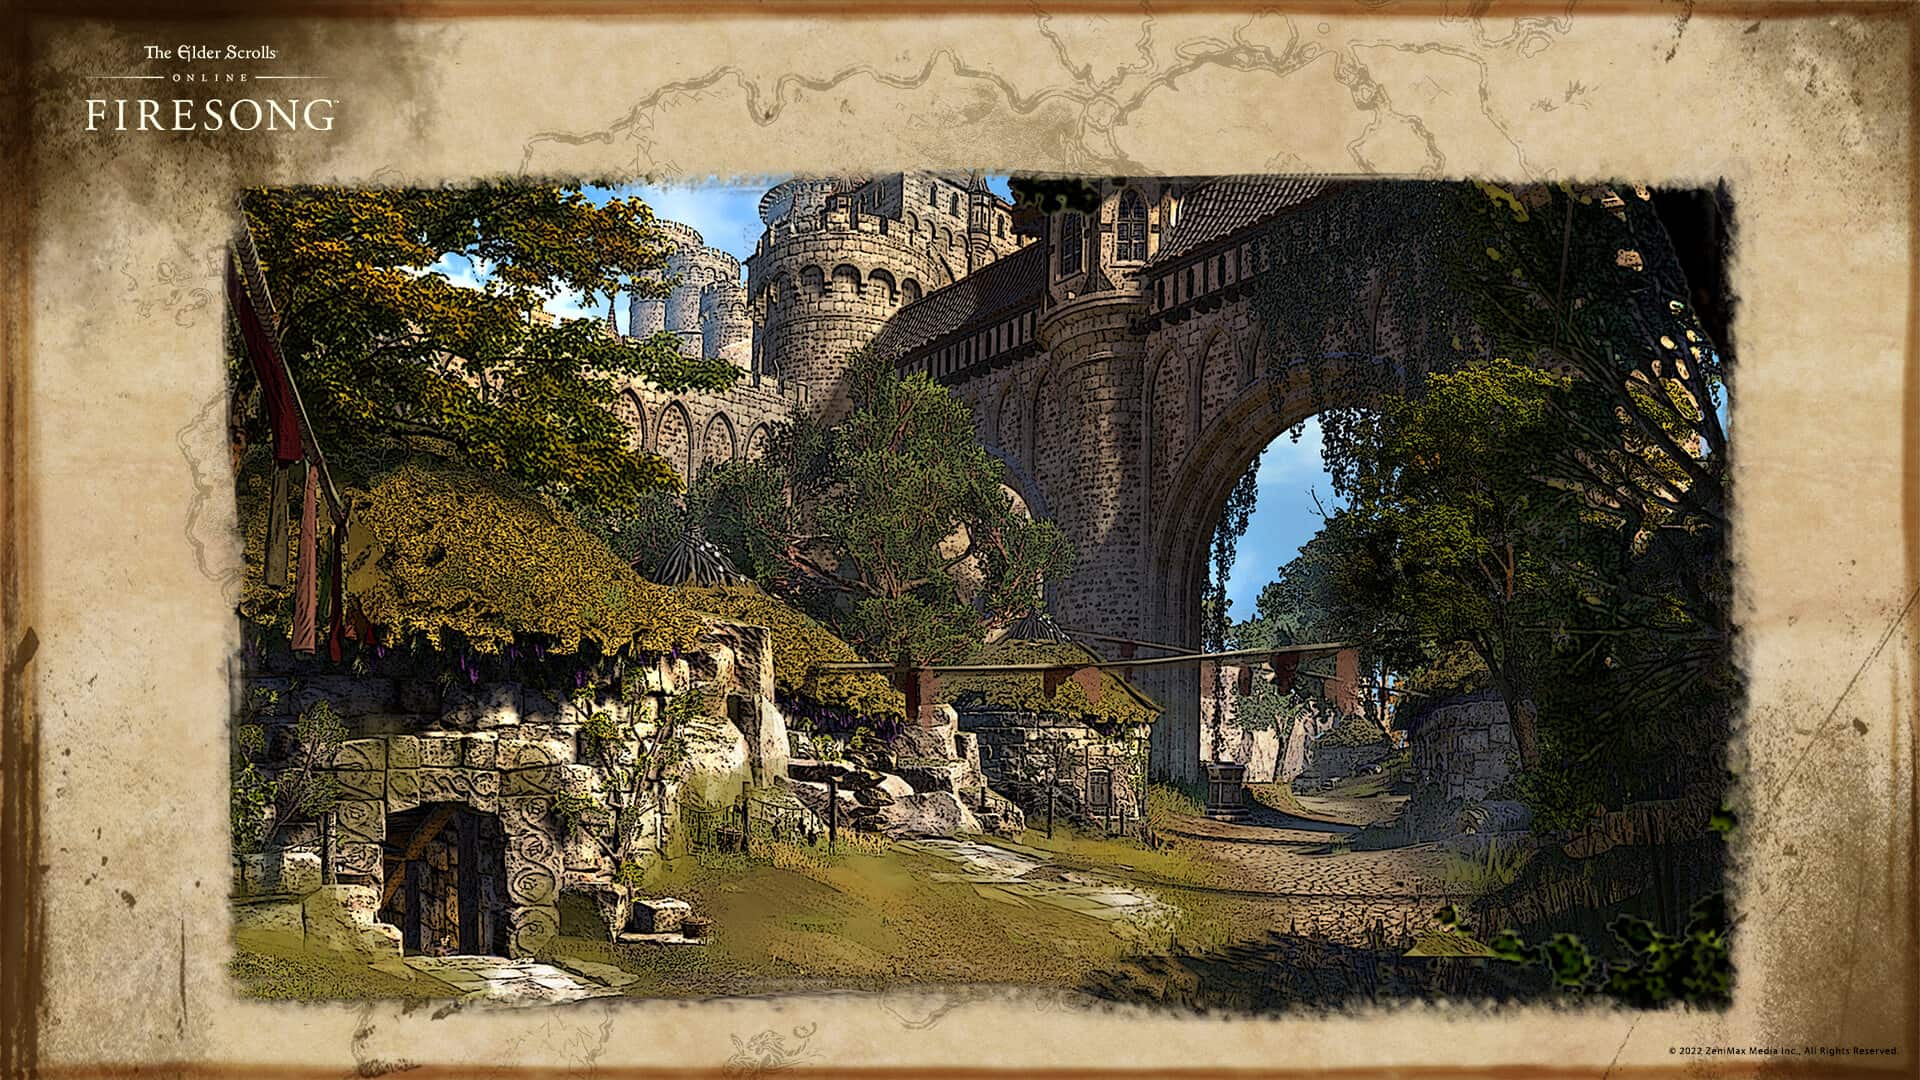 ESO Firesong Update 36 PTS Notes v8.2.0 - Deltia's Gaming